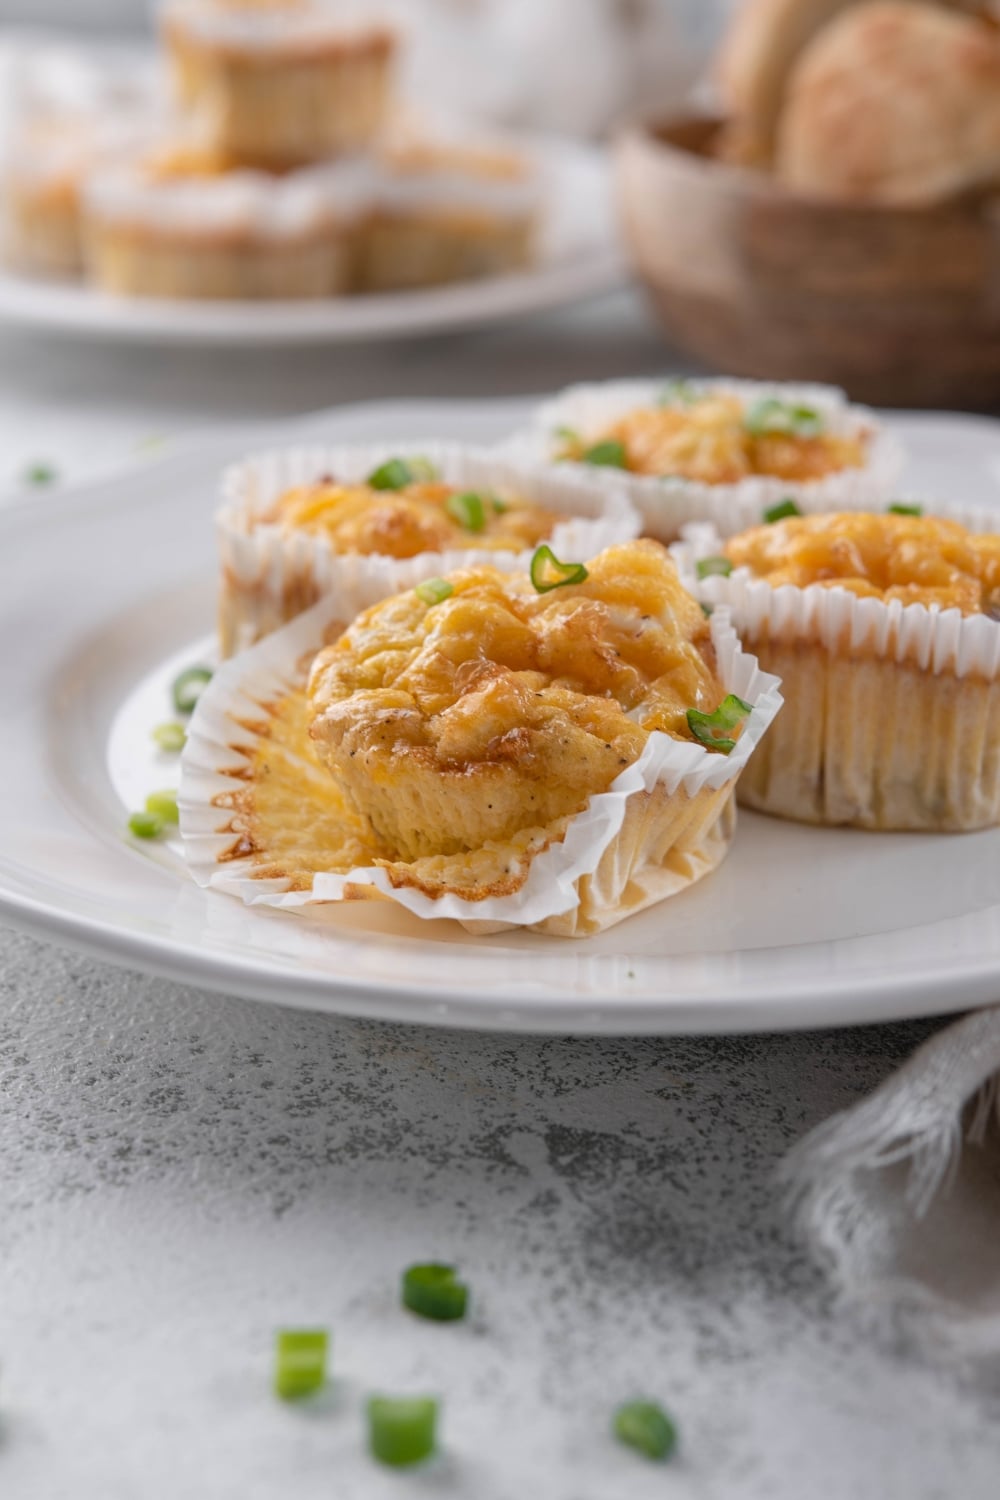 Four sausage egg muffins in muffin liners, garnished with green onions, on a white plate. One muffin has part of its liner peeled open.